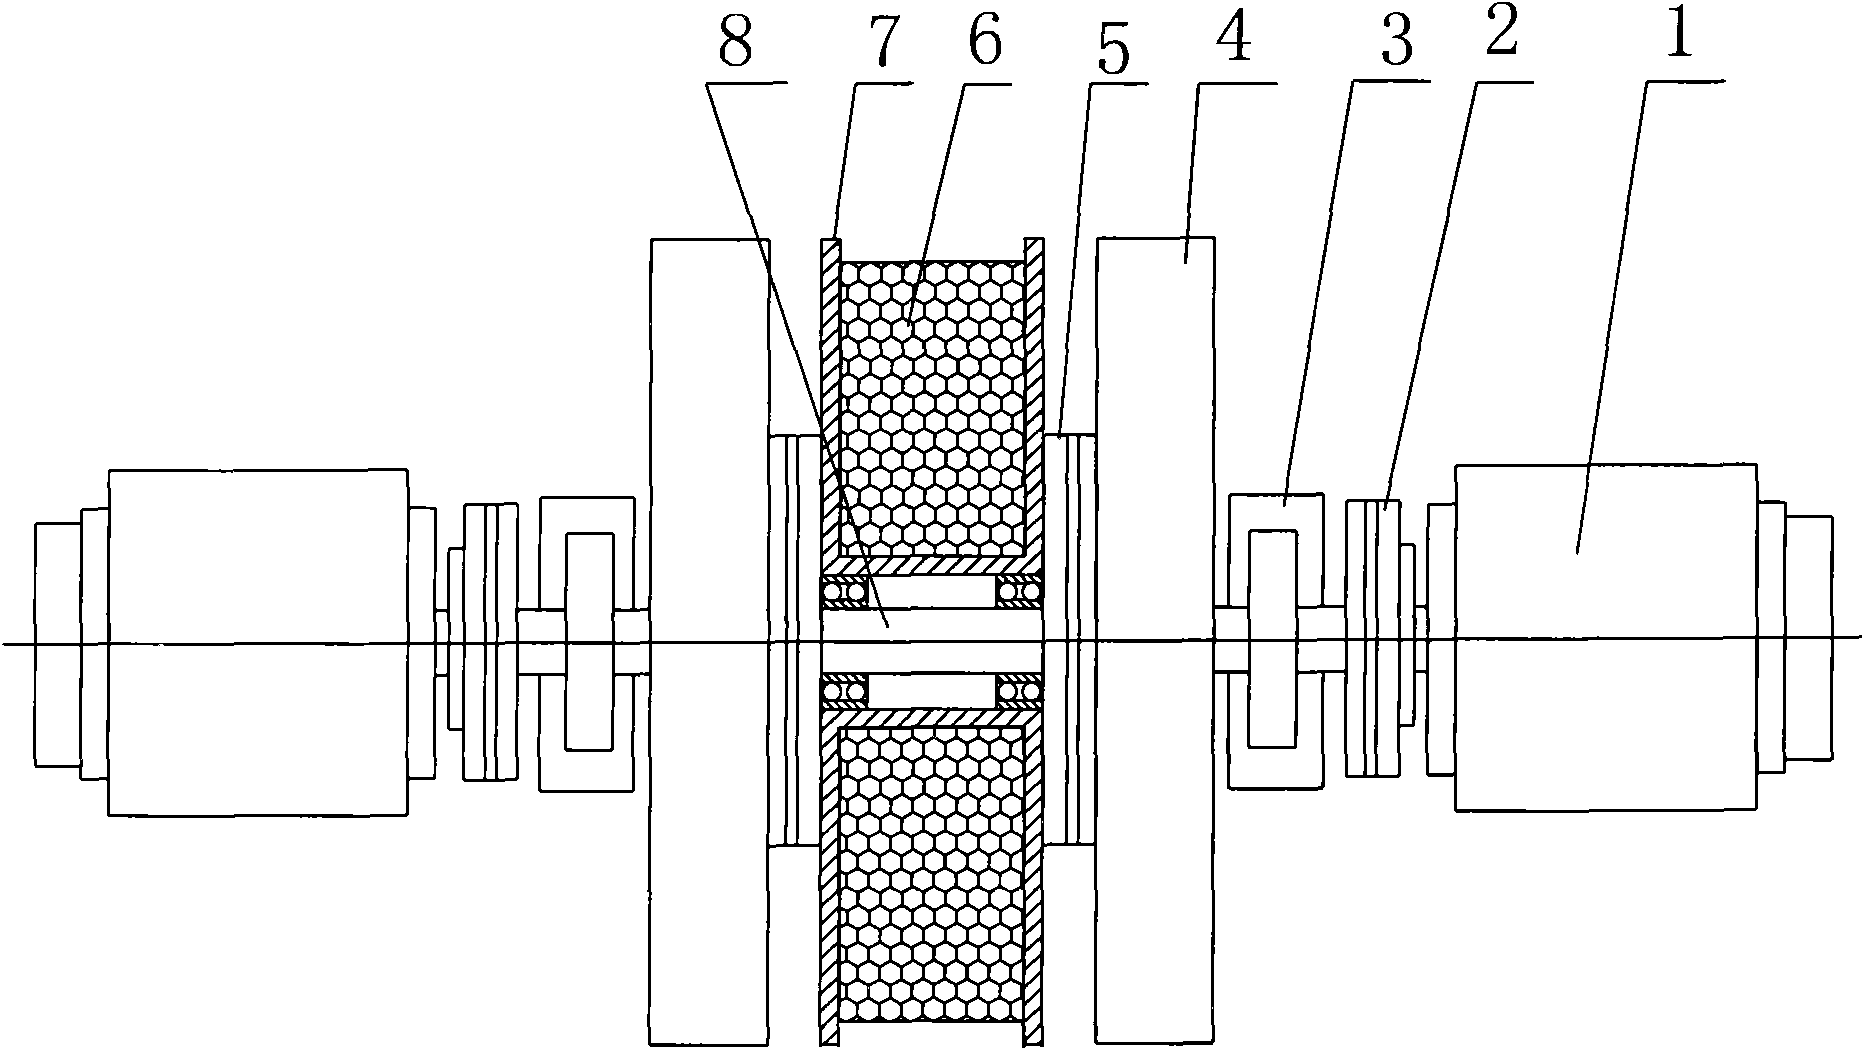 Flywheel energy storage accelerating carrier-based aircraft ejector and ejection method